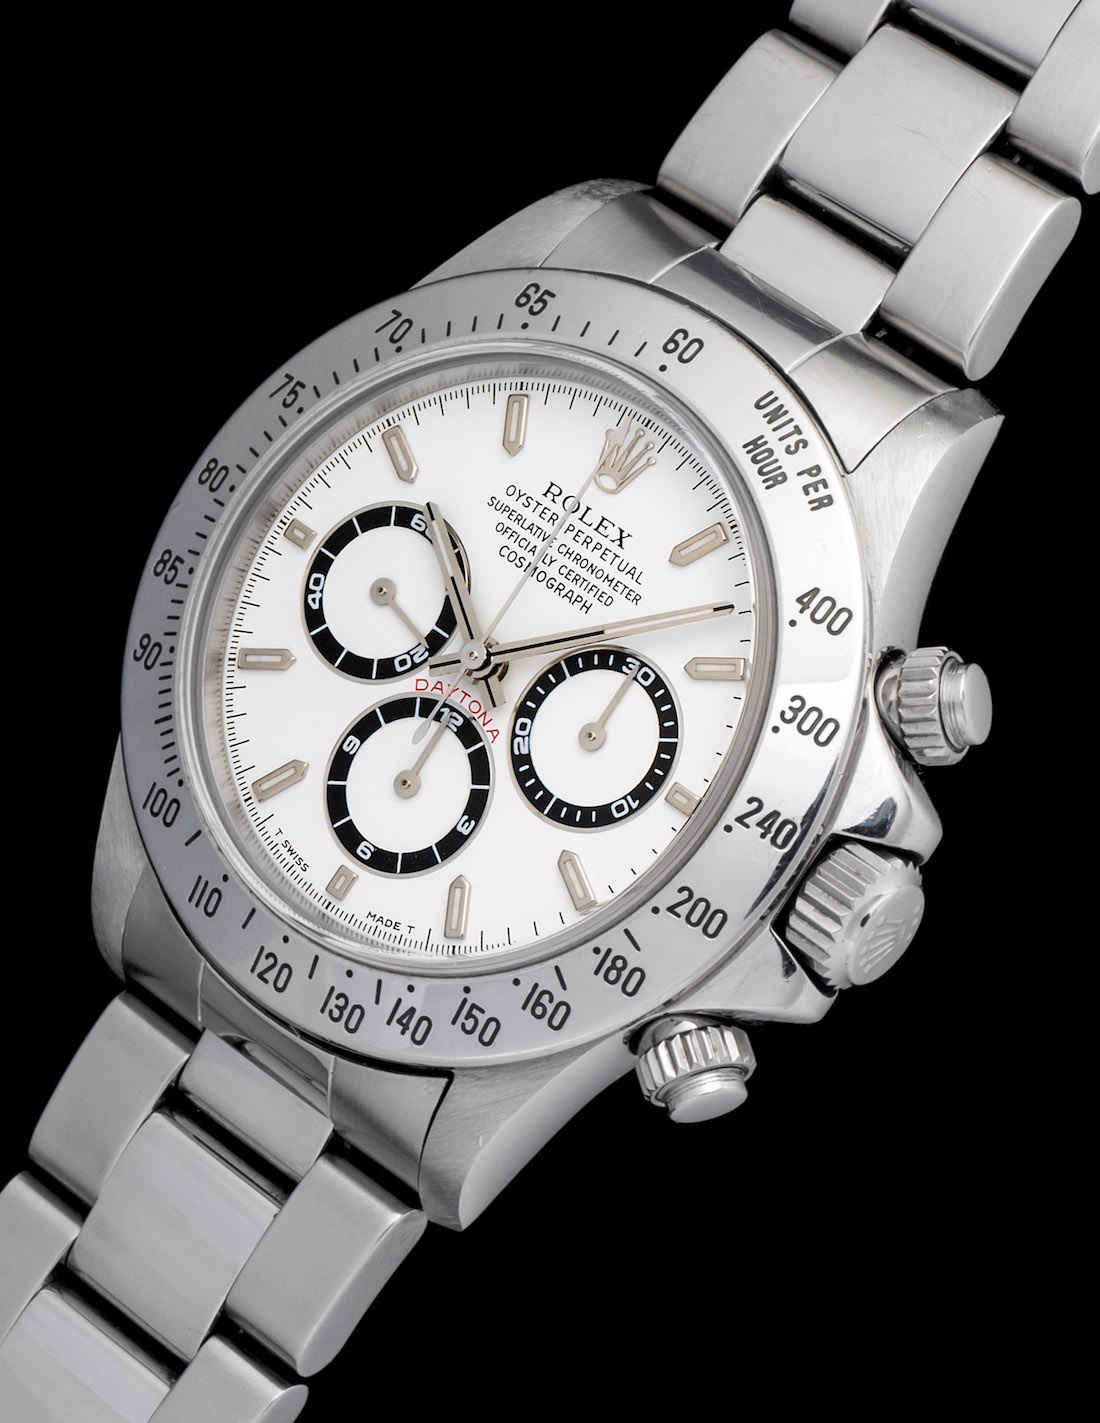 Rolex Daytona 116520 In Steel With Black Dial Watch Review 